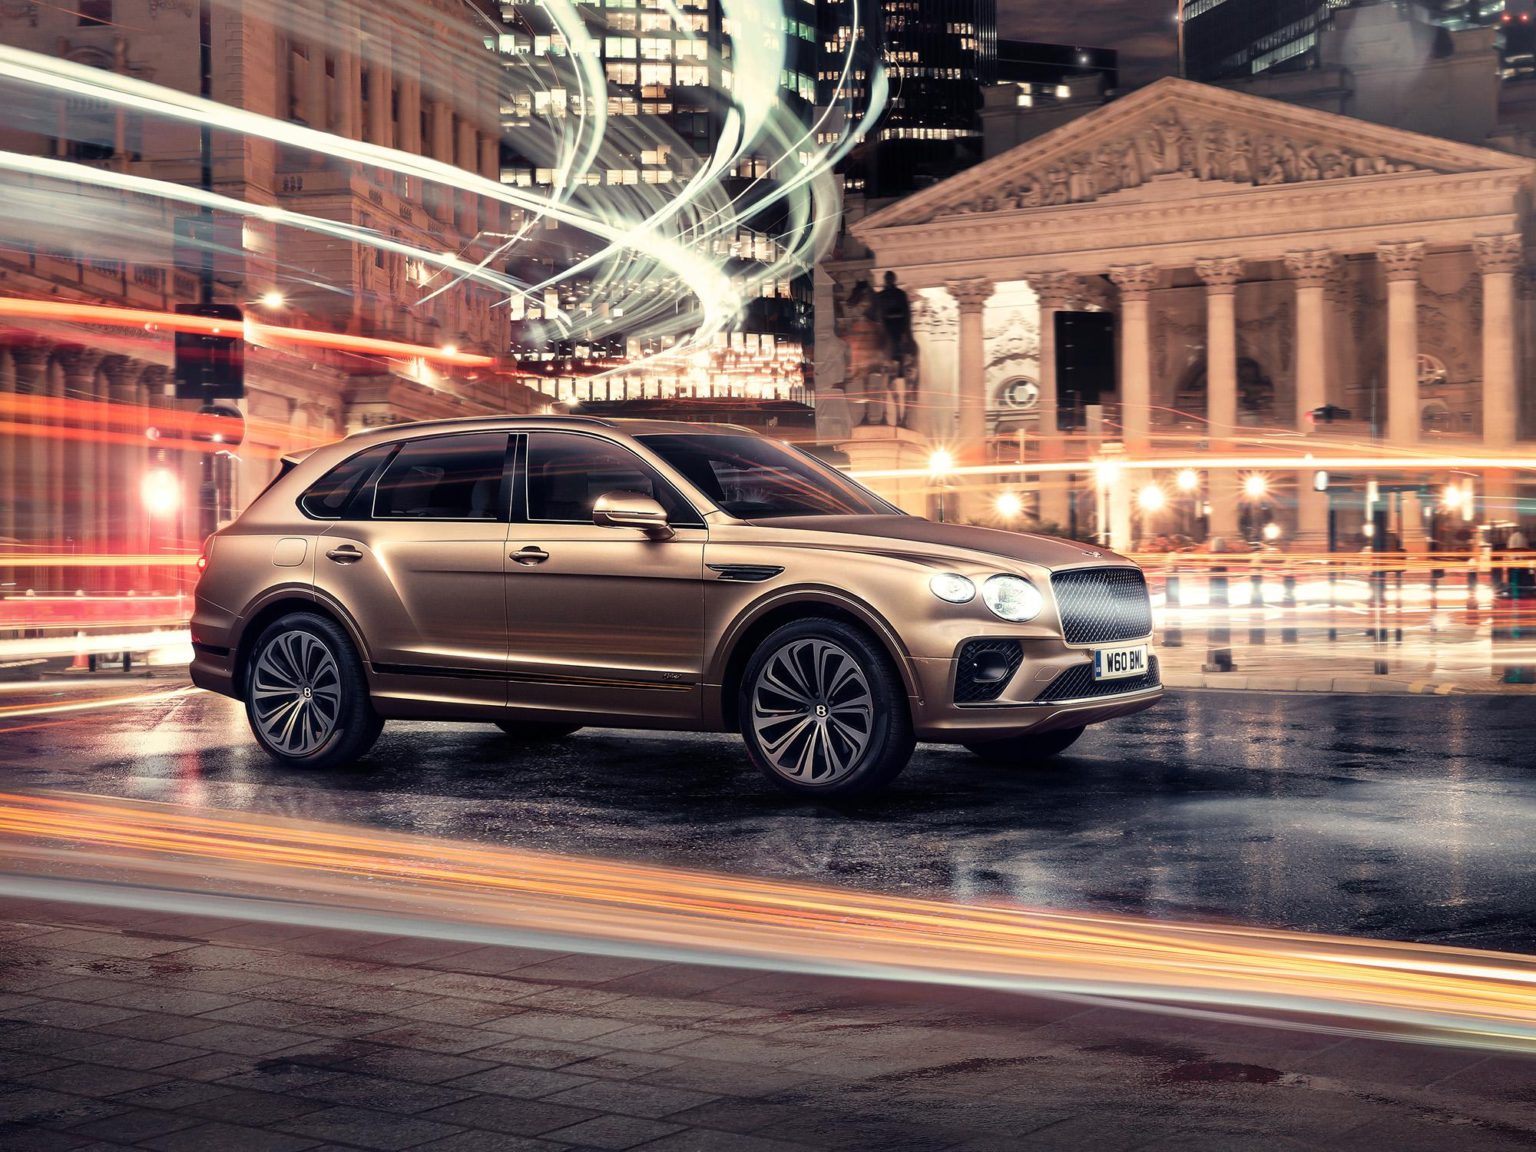 The 2021 Bentley Bentayga Hybrid is a plug-in electric vehicle that utilizes a battery, electric motor, and V6 engine.